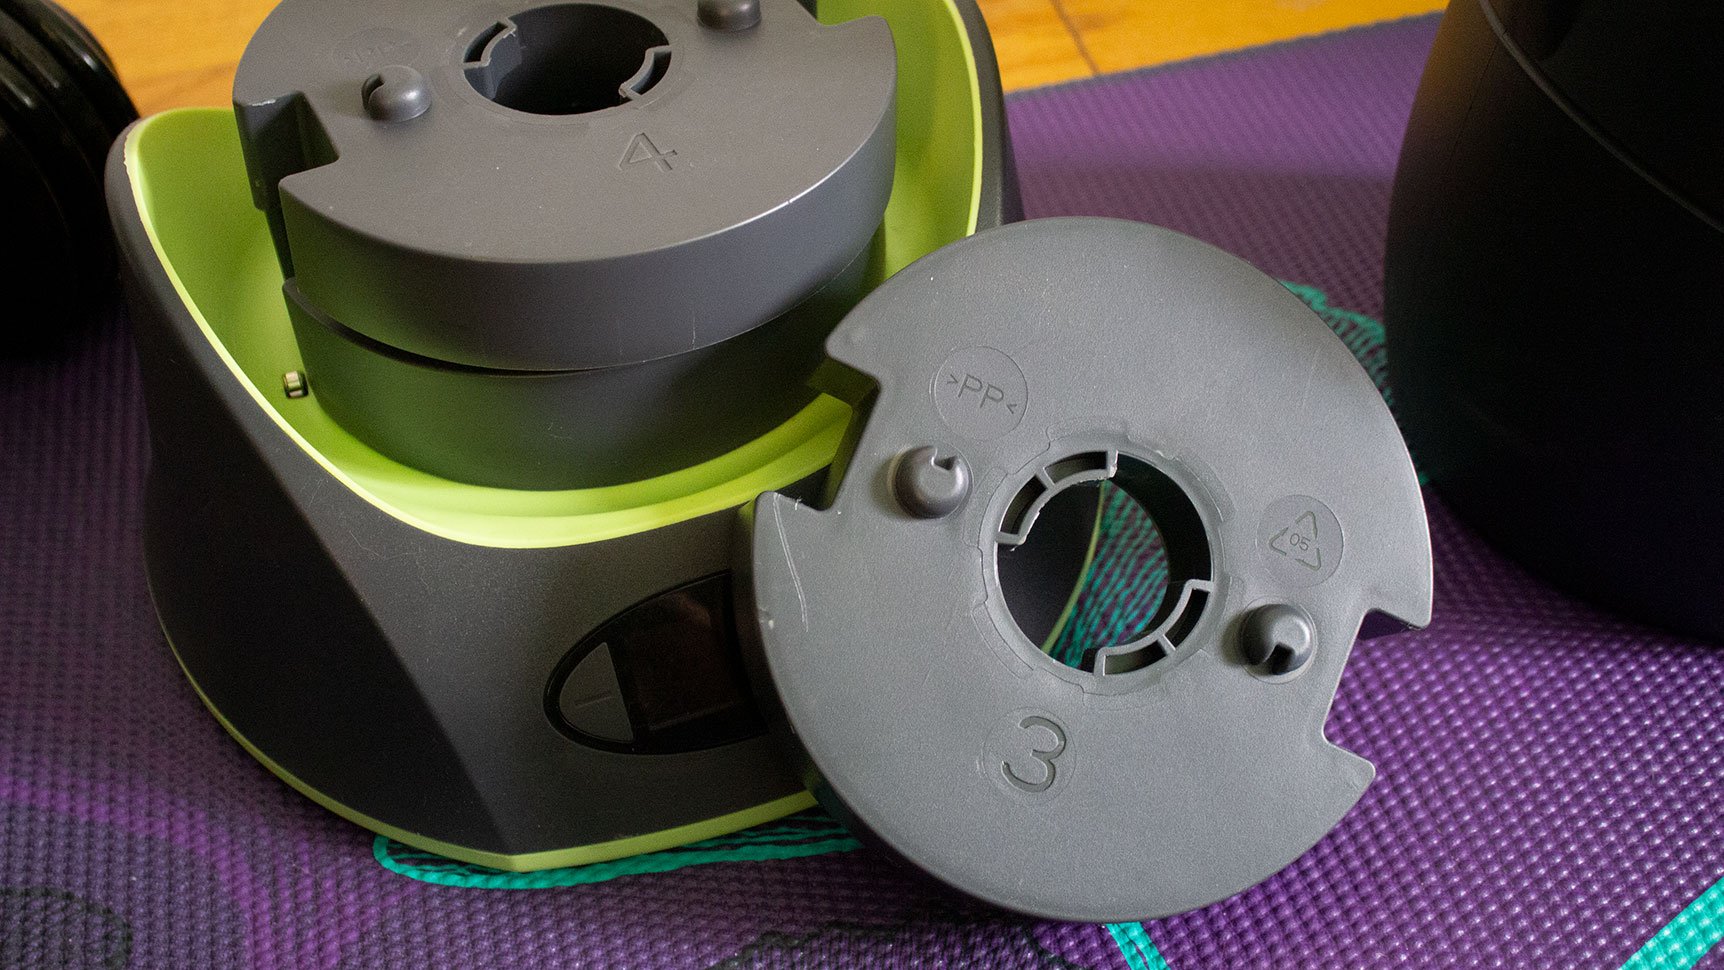 There are 5 disc-shaped weights total, each 3 kg. The handle + shell itself are 5 kg altogether.  (Photo: Victoria Song/Gizmodo)